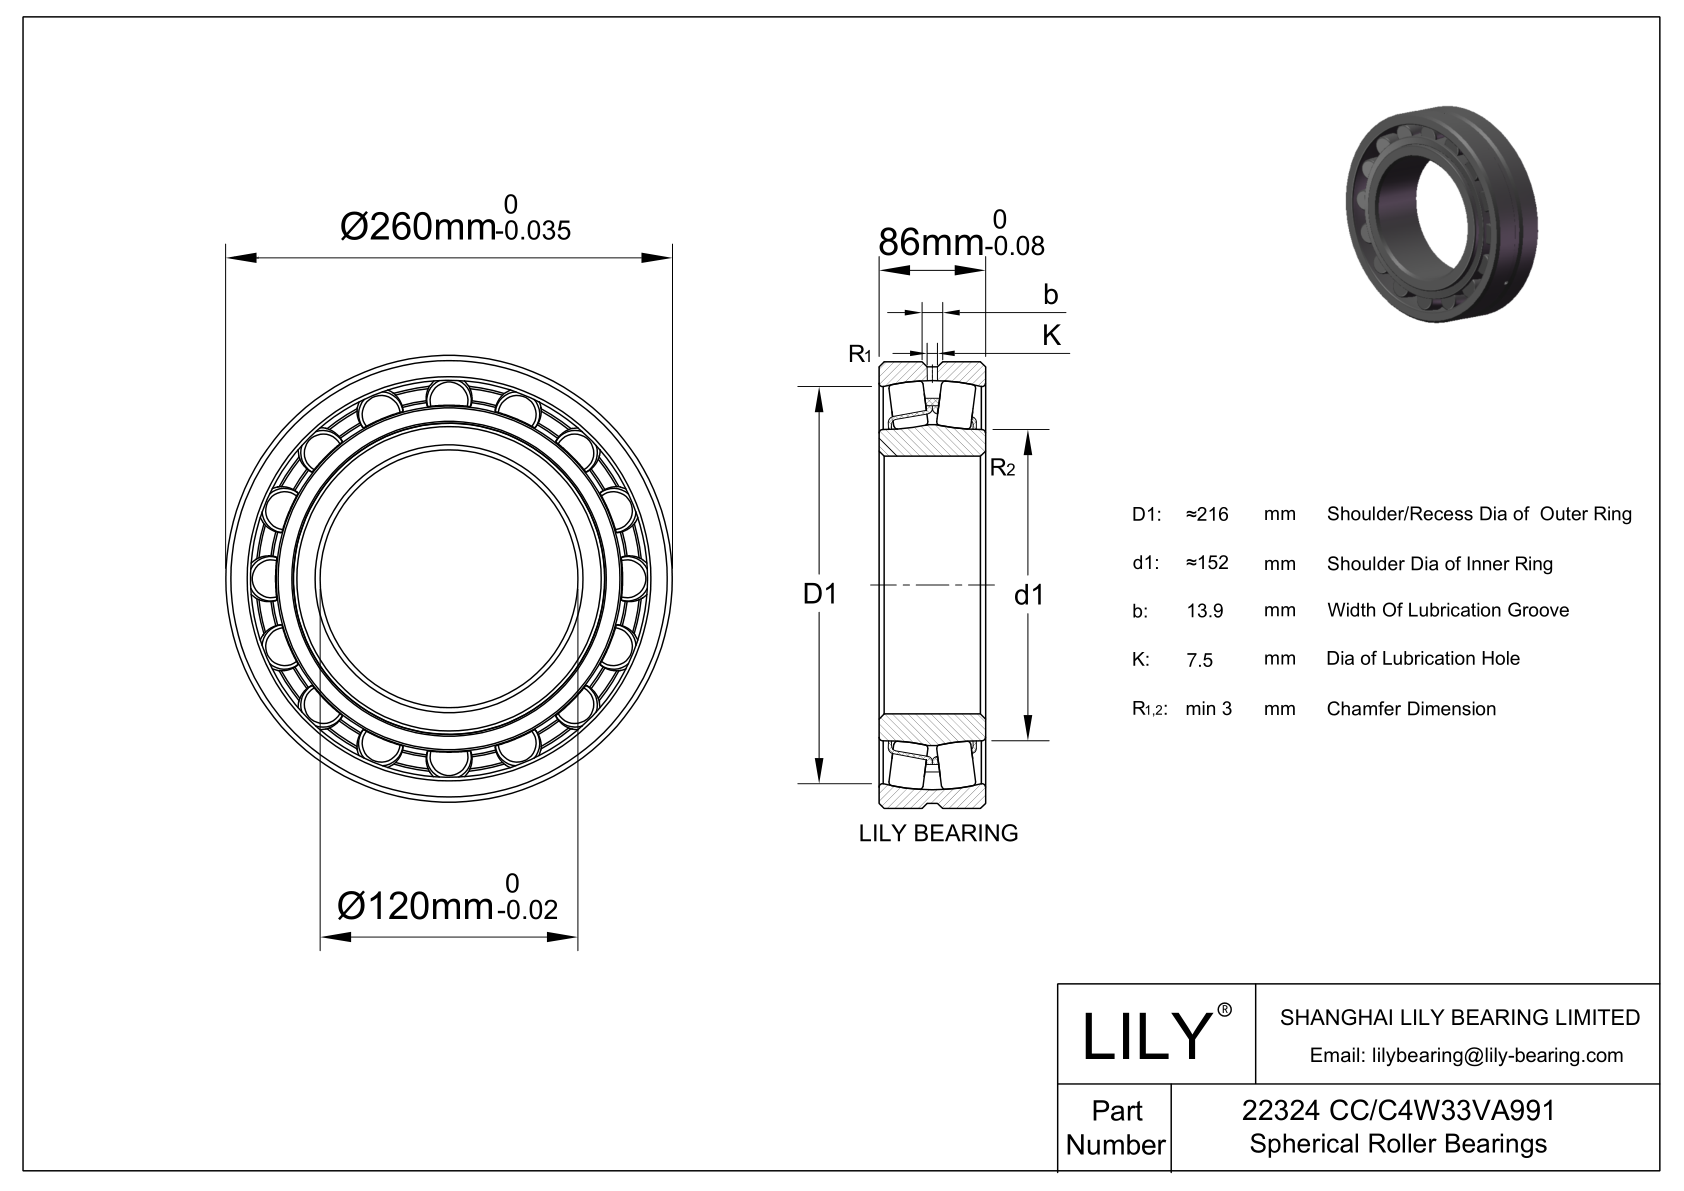 22324 CC/C4W33VA991 Double Row Spherical Roller Bearing cad drawing